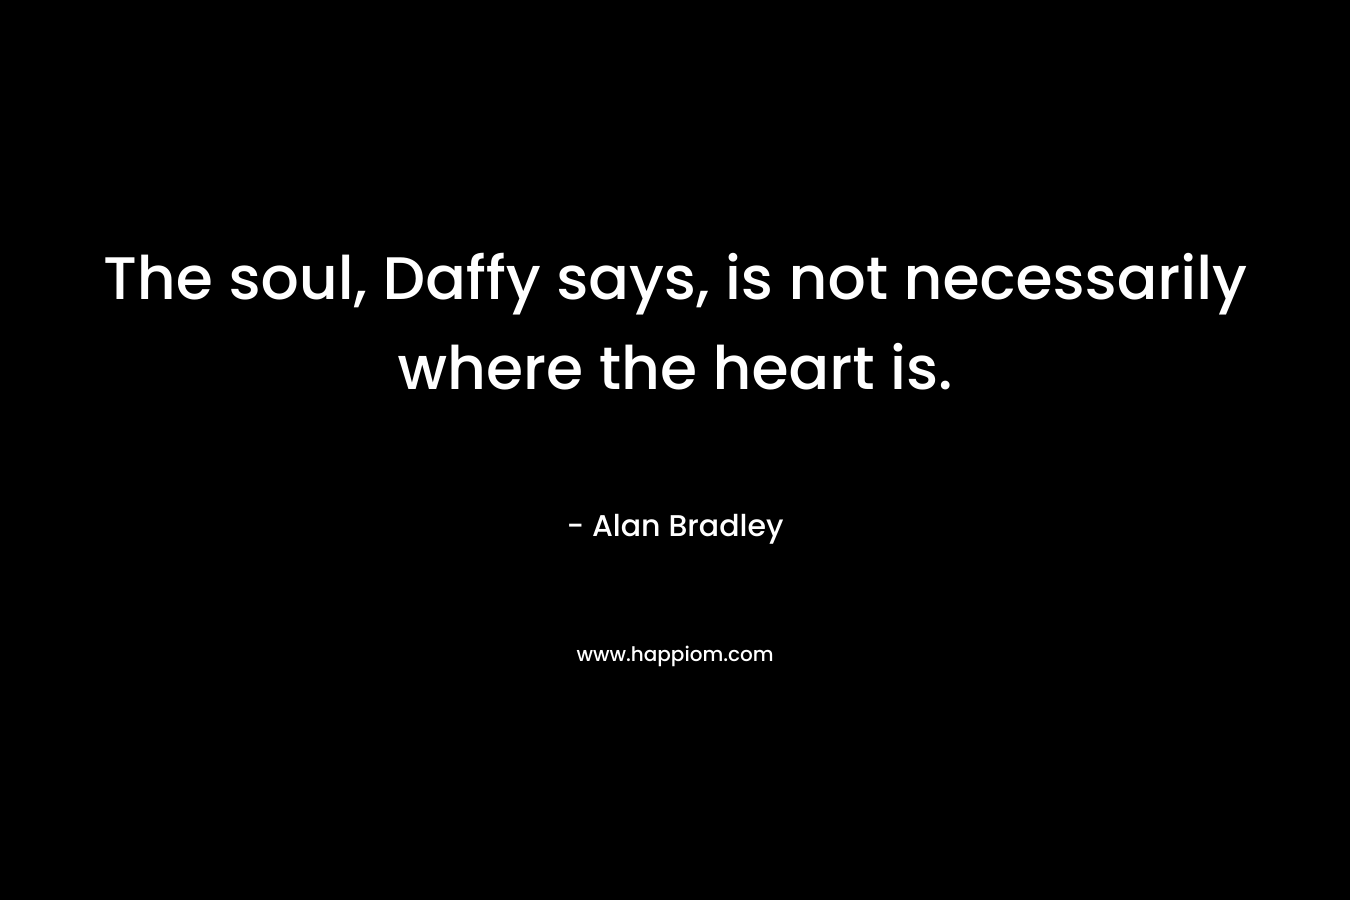 The soul, Daffy says, is not necessarily where the heart is.